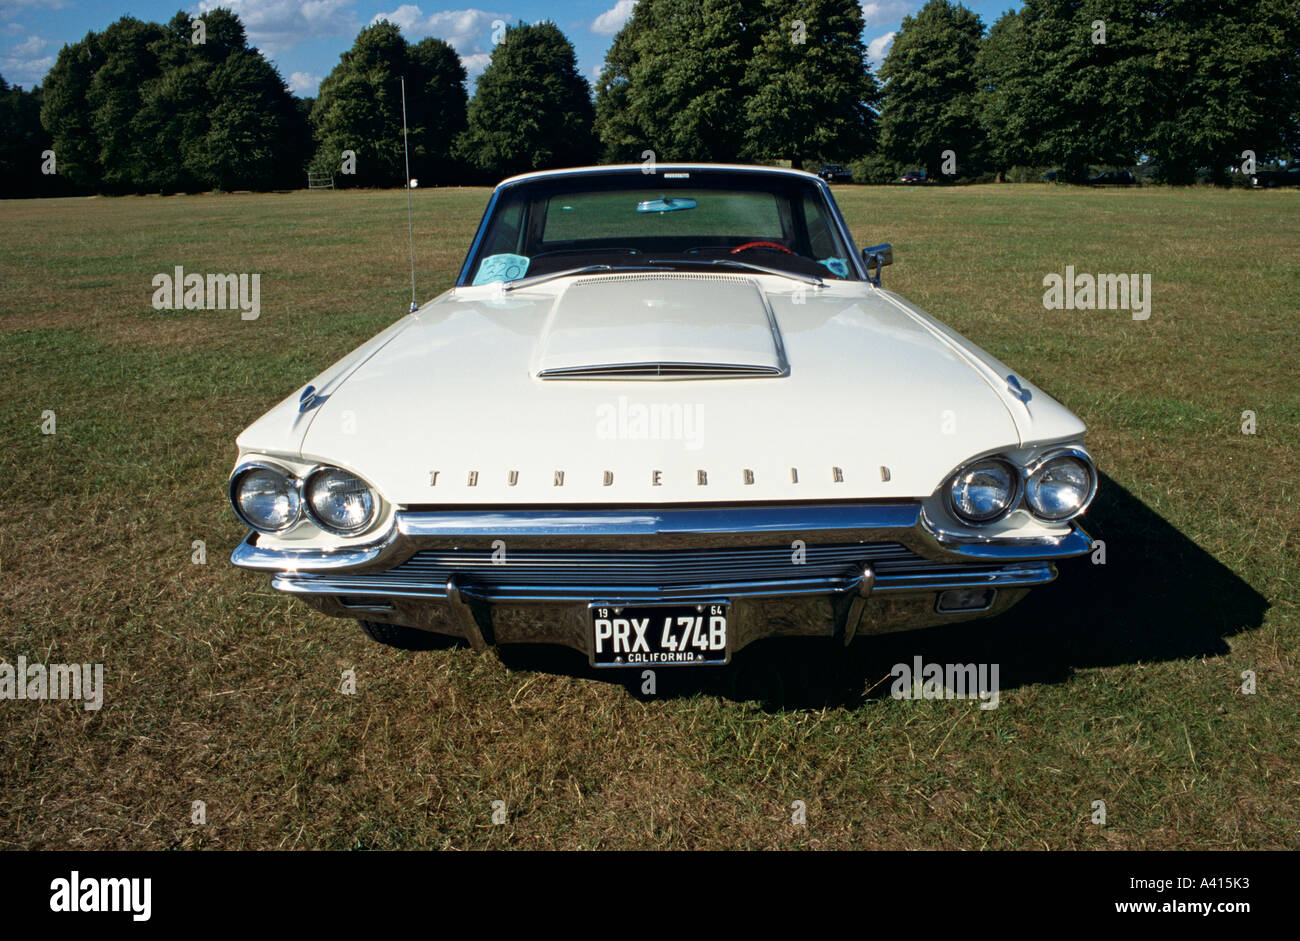 Ford Series 80 Thunderbird Hardtop Coupe of 1964 Stock Photo